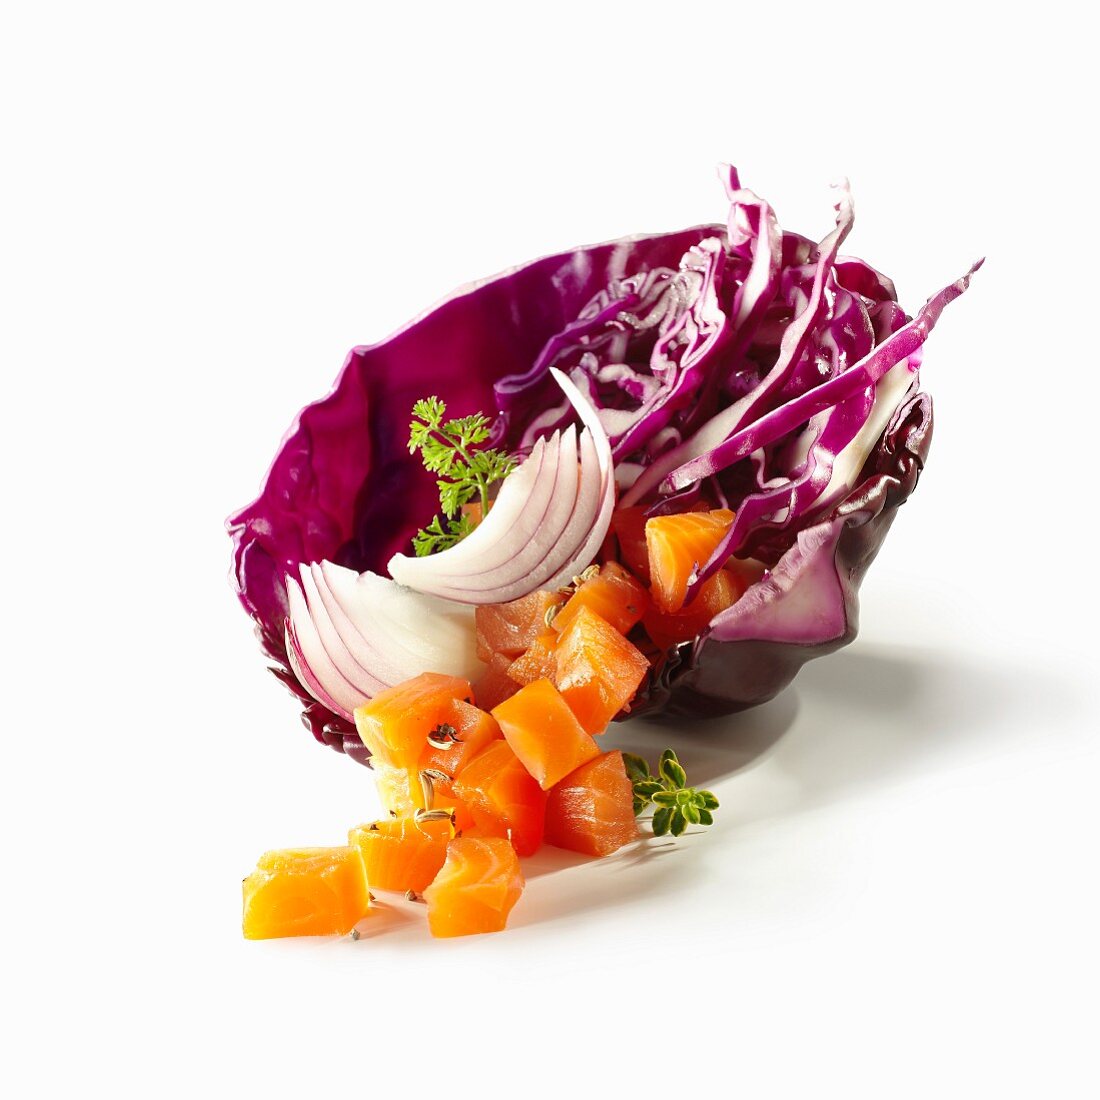 Raw salmon and red cabbage salad